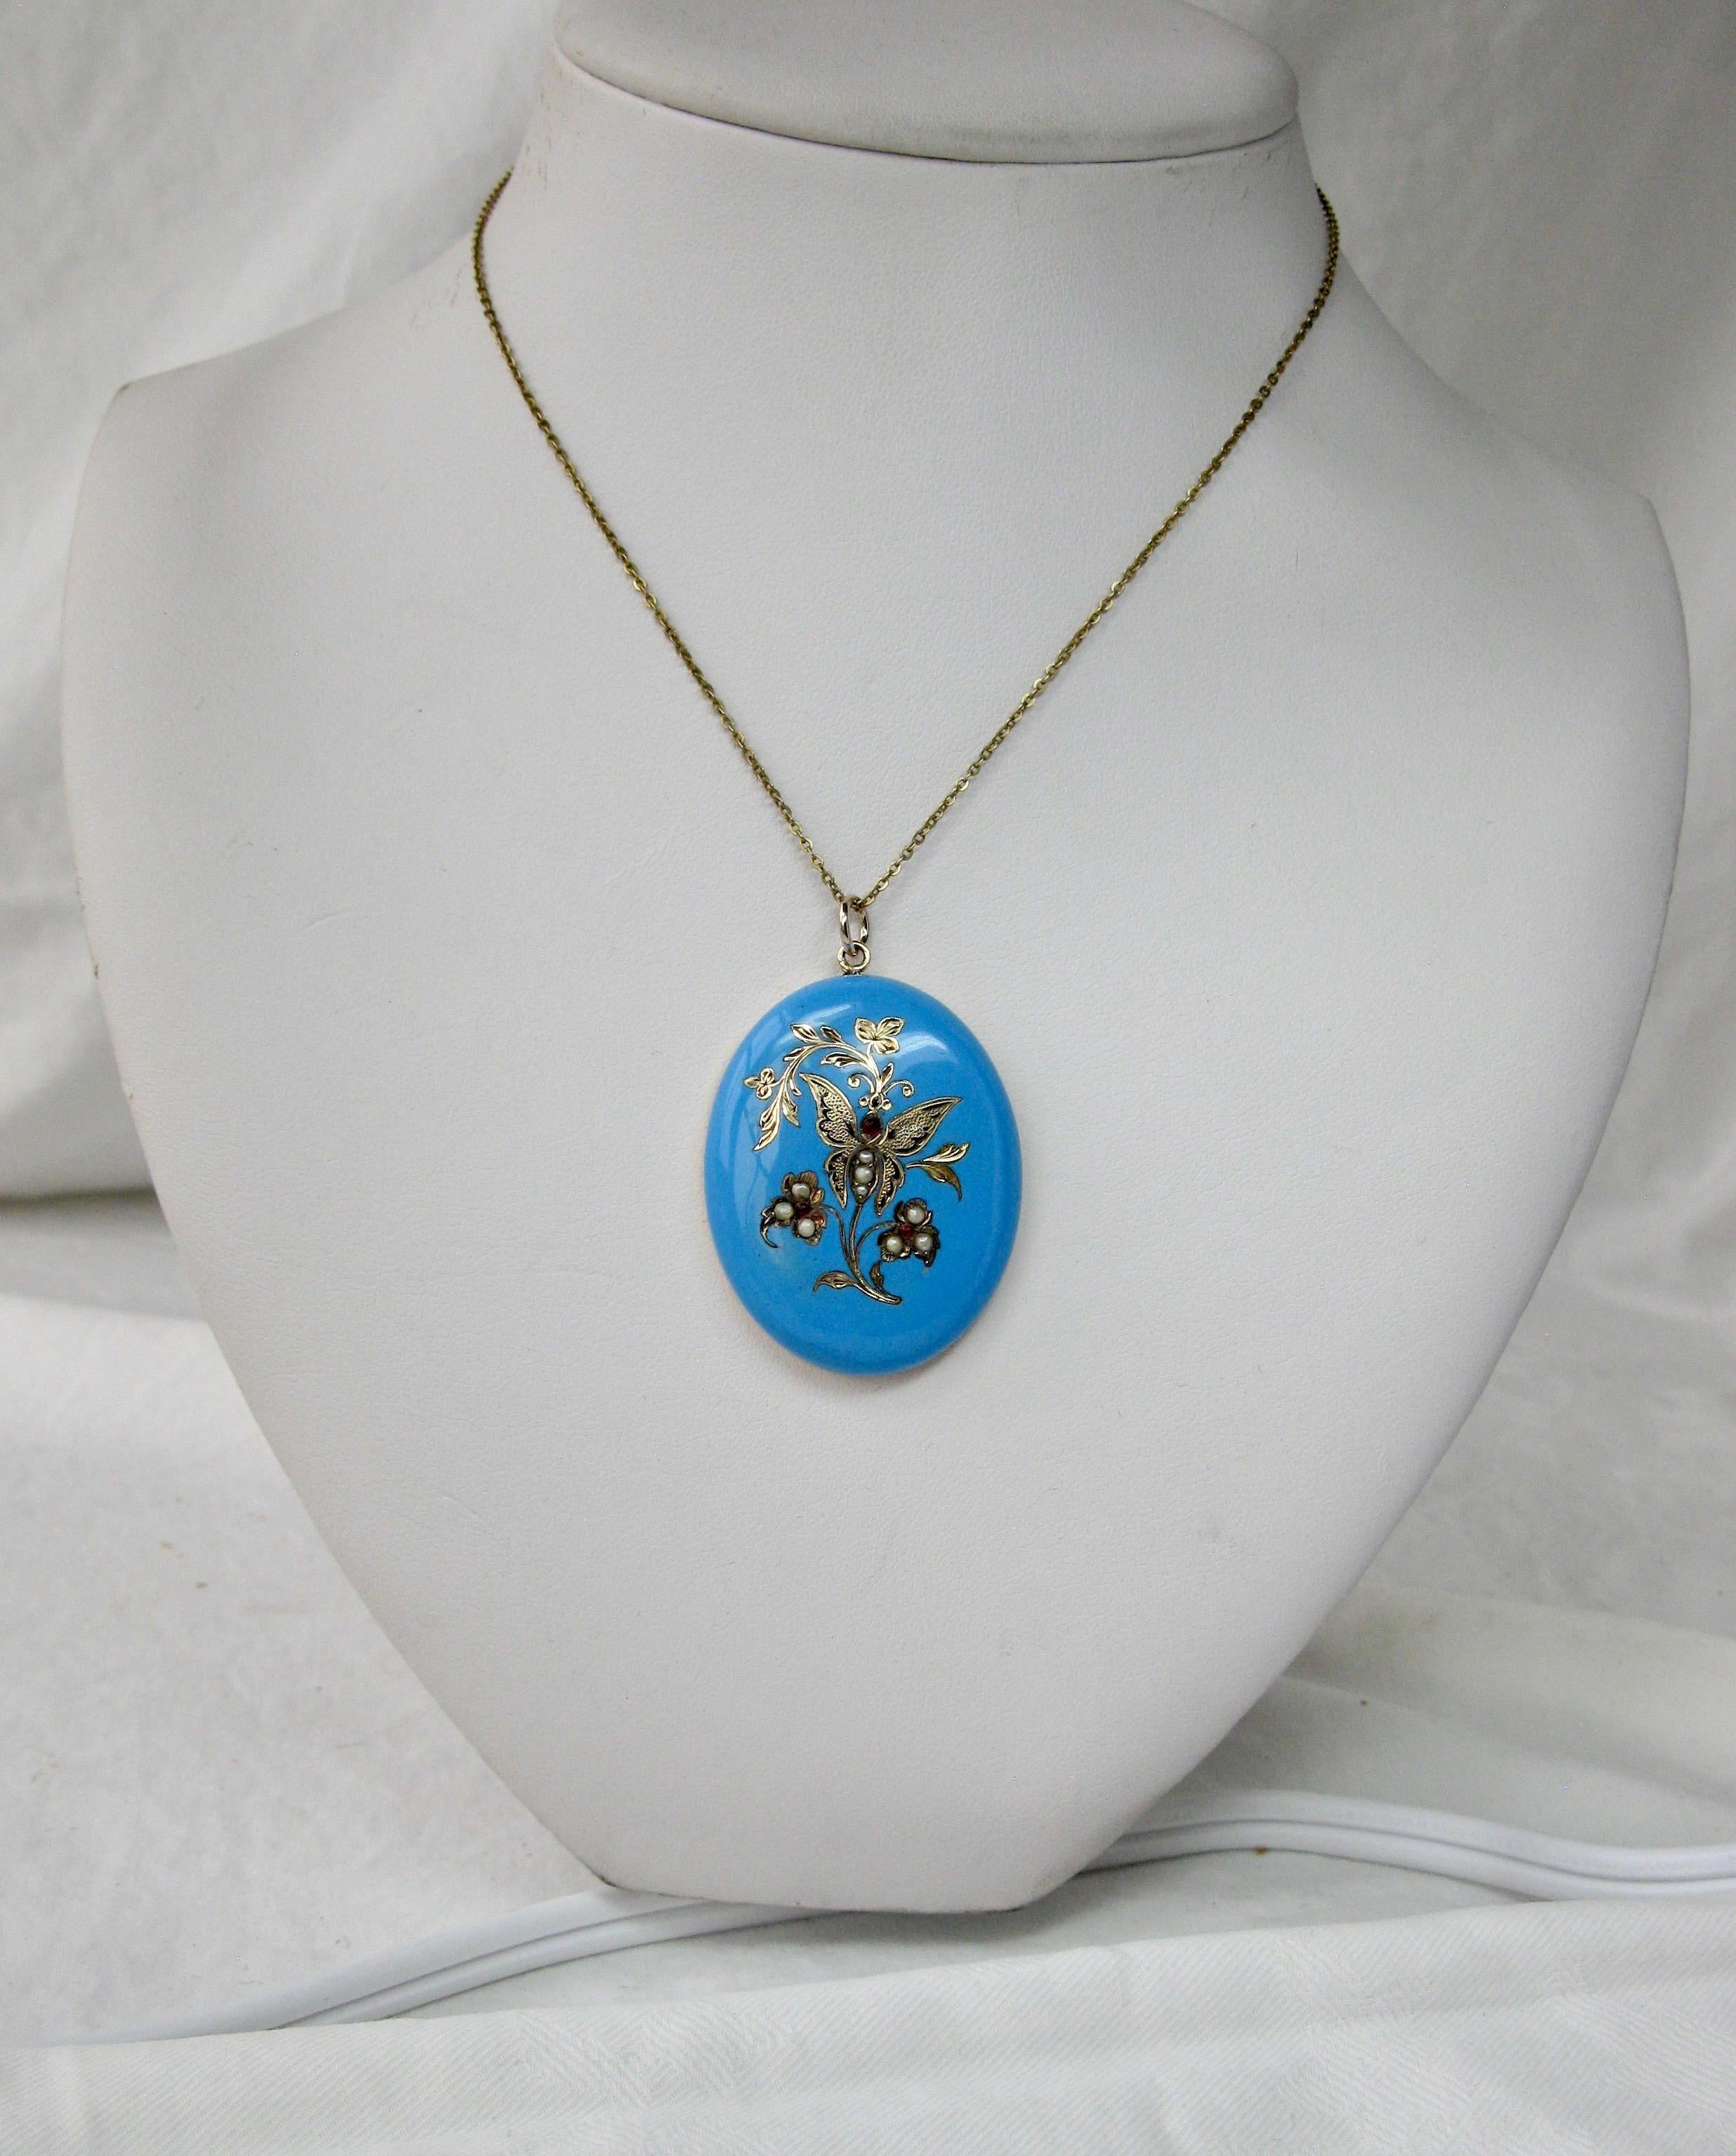 This is a rare and wonderful Victorian locket pendant with a Butterfly and Flowers set with Ruby and Pearl in 14 Karat Gold with Robin's Egg Blue Enamel.  The Butterfly Locket dates to the Victorian period when insect inspired jewelry was sweeping